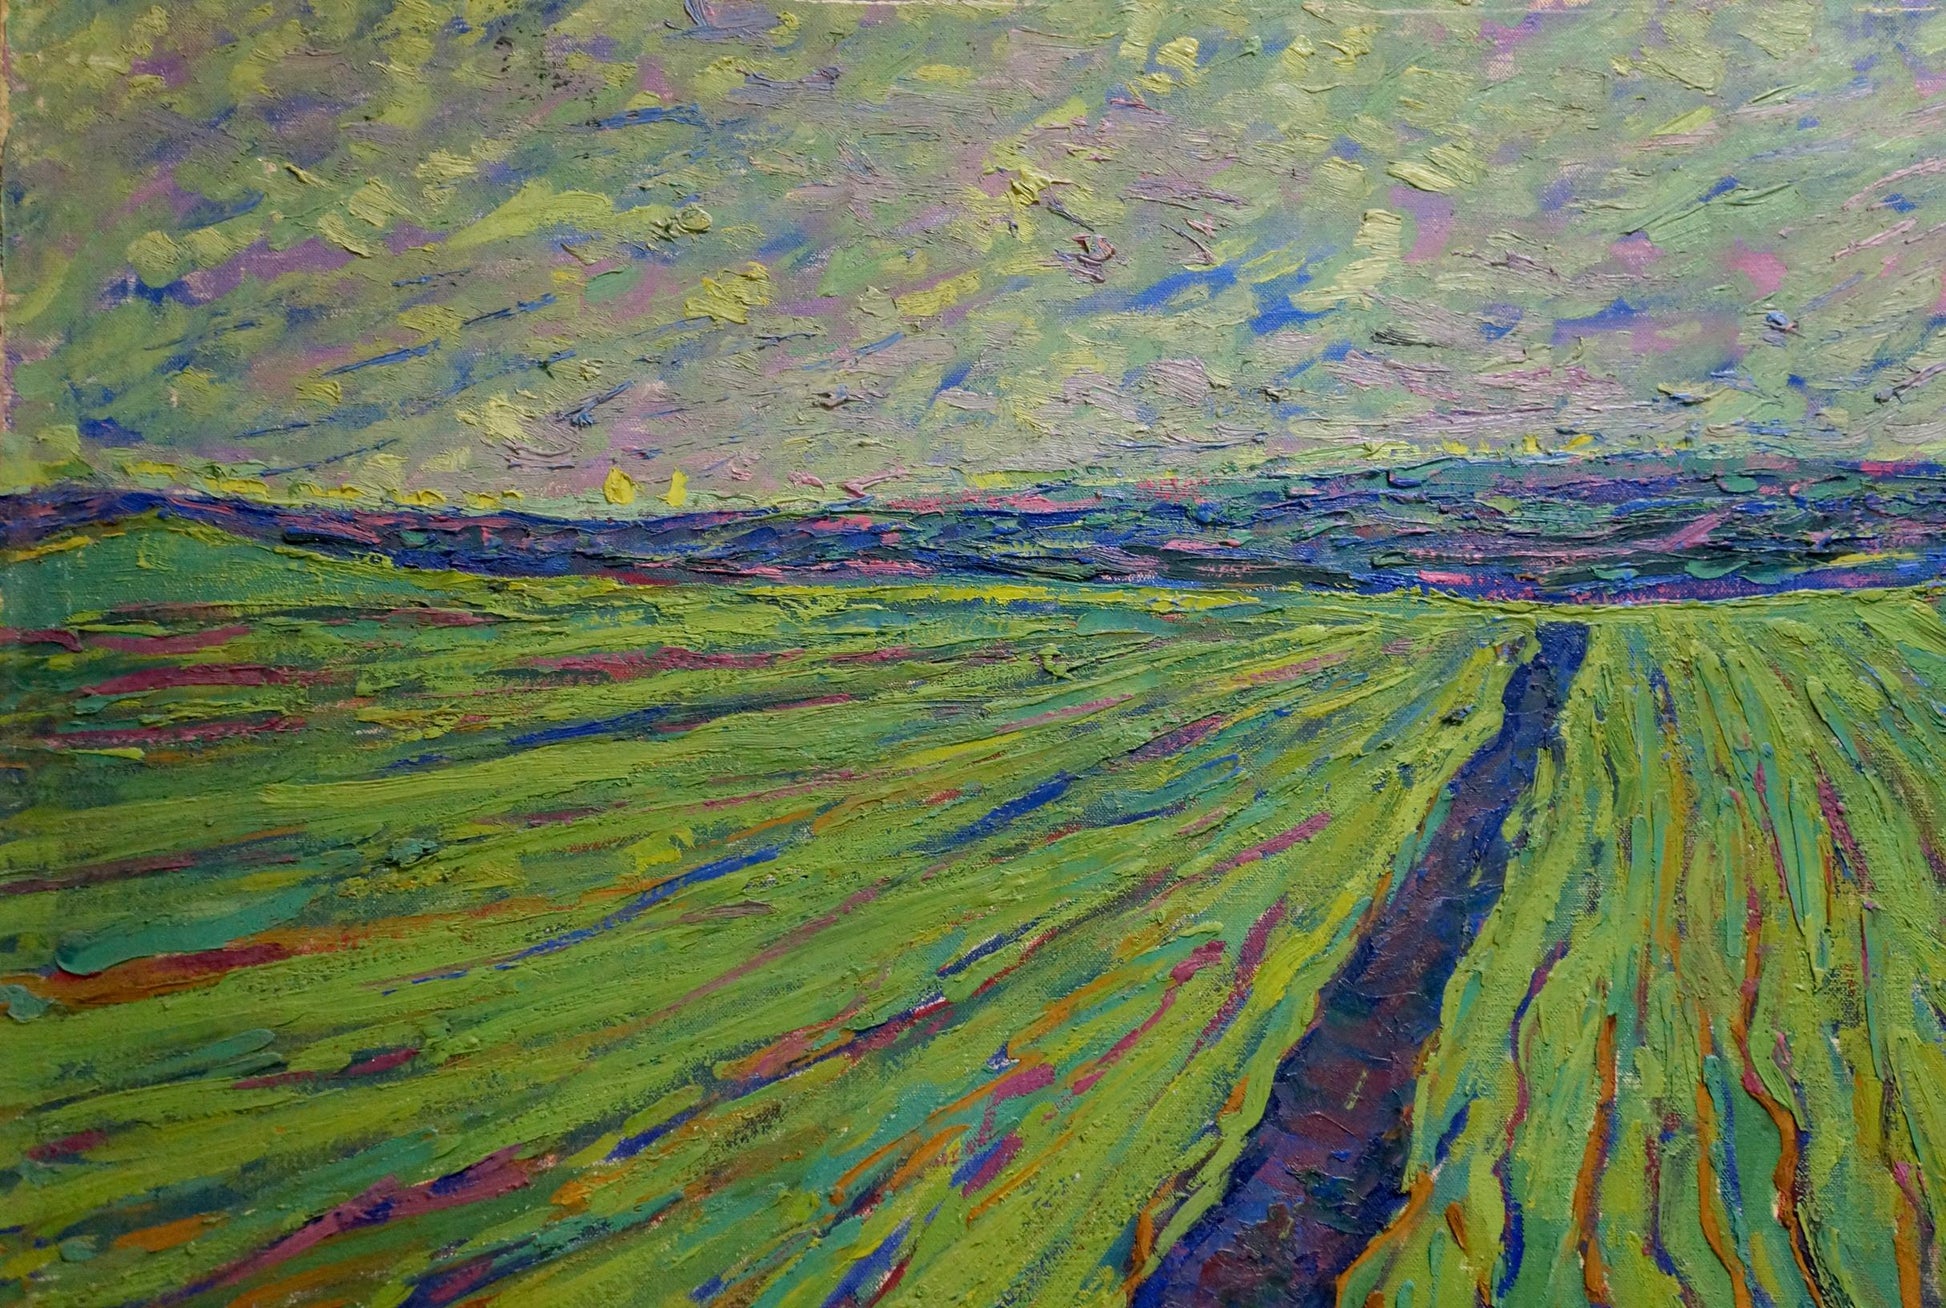 Oil painting depicting "Fields" by Dmitry Andreevich Chvala